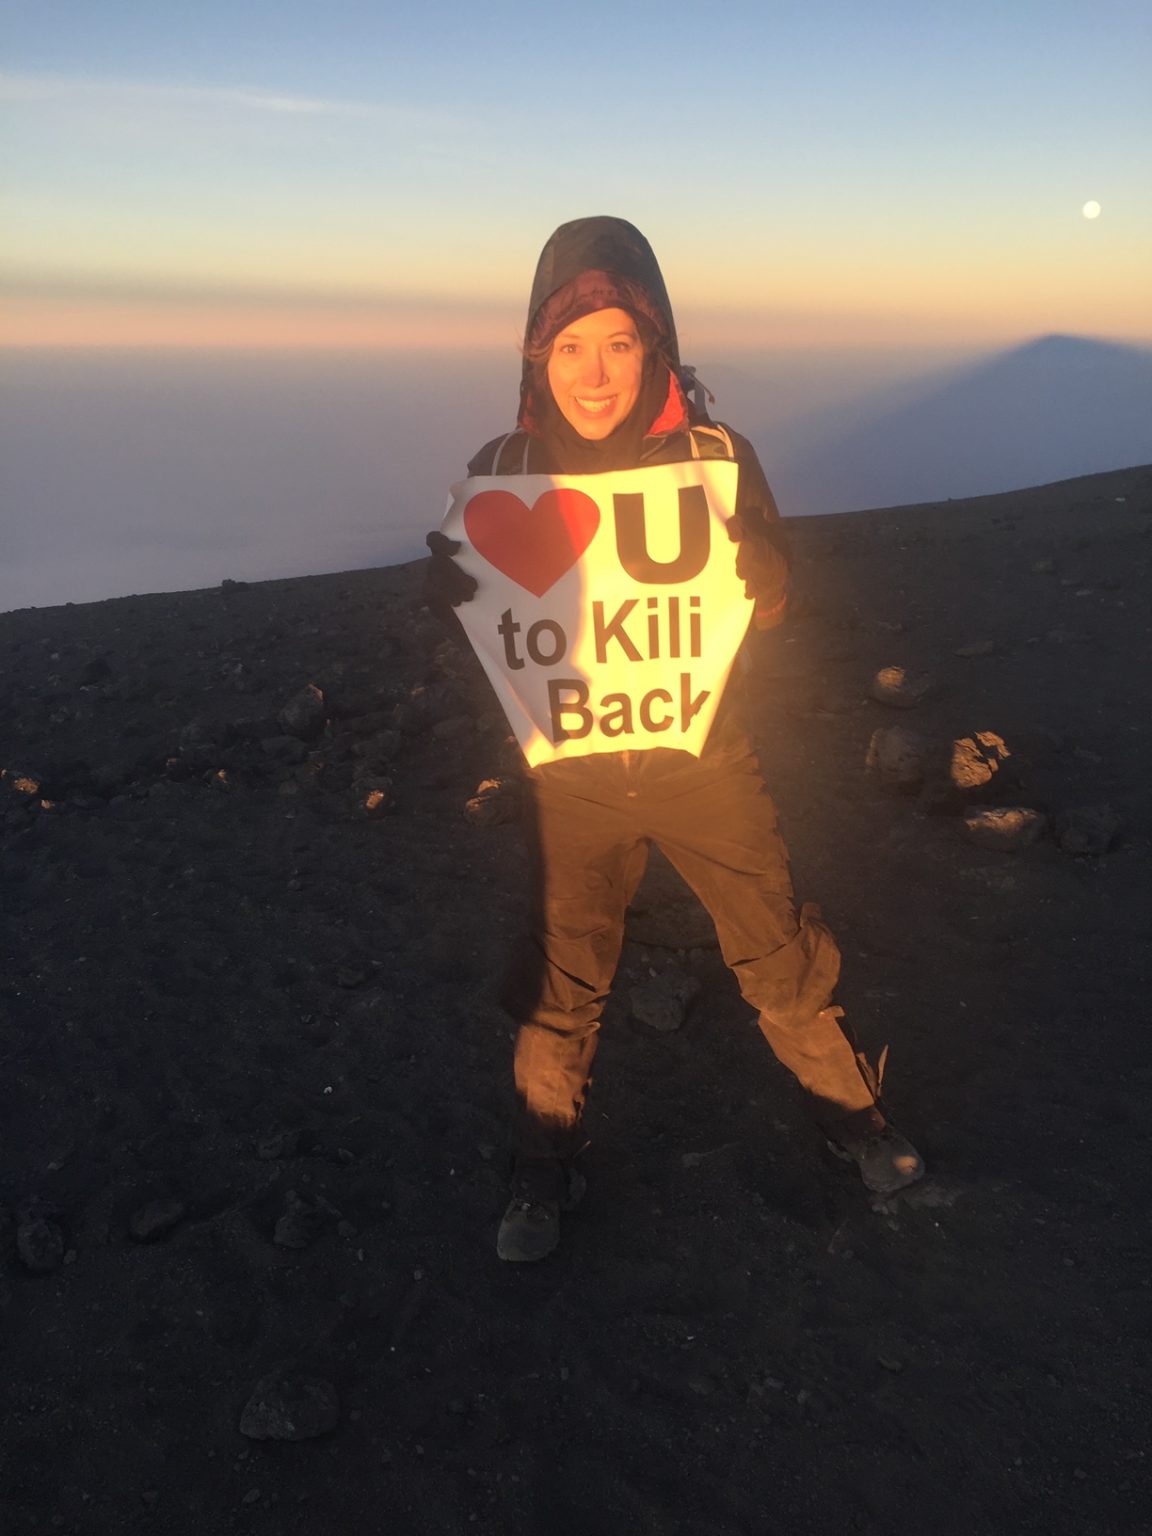 My soon-to-be husband, Luke, couldn't come on the climb with us. So I had this sign to show him at the summit!